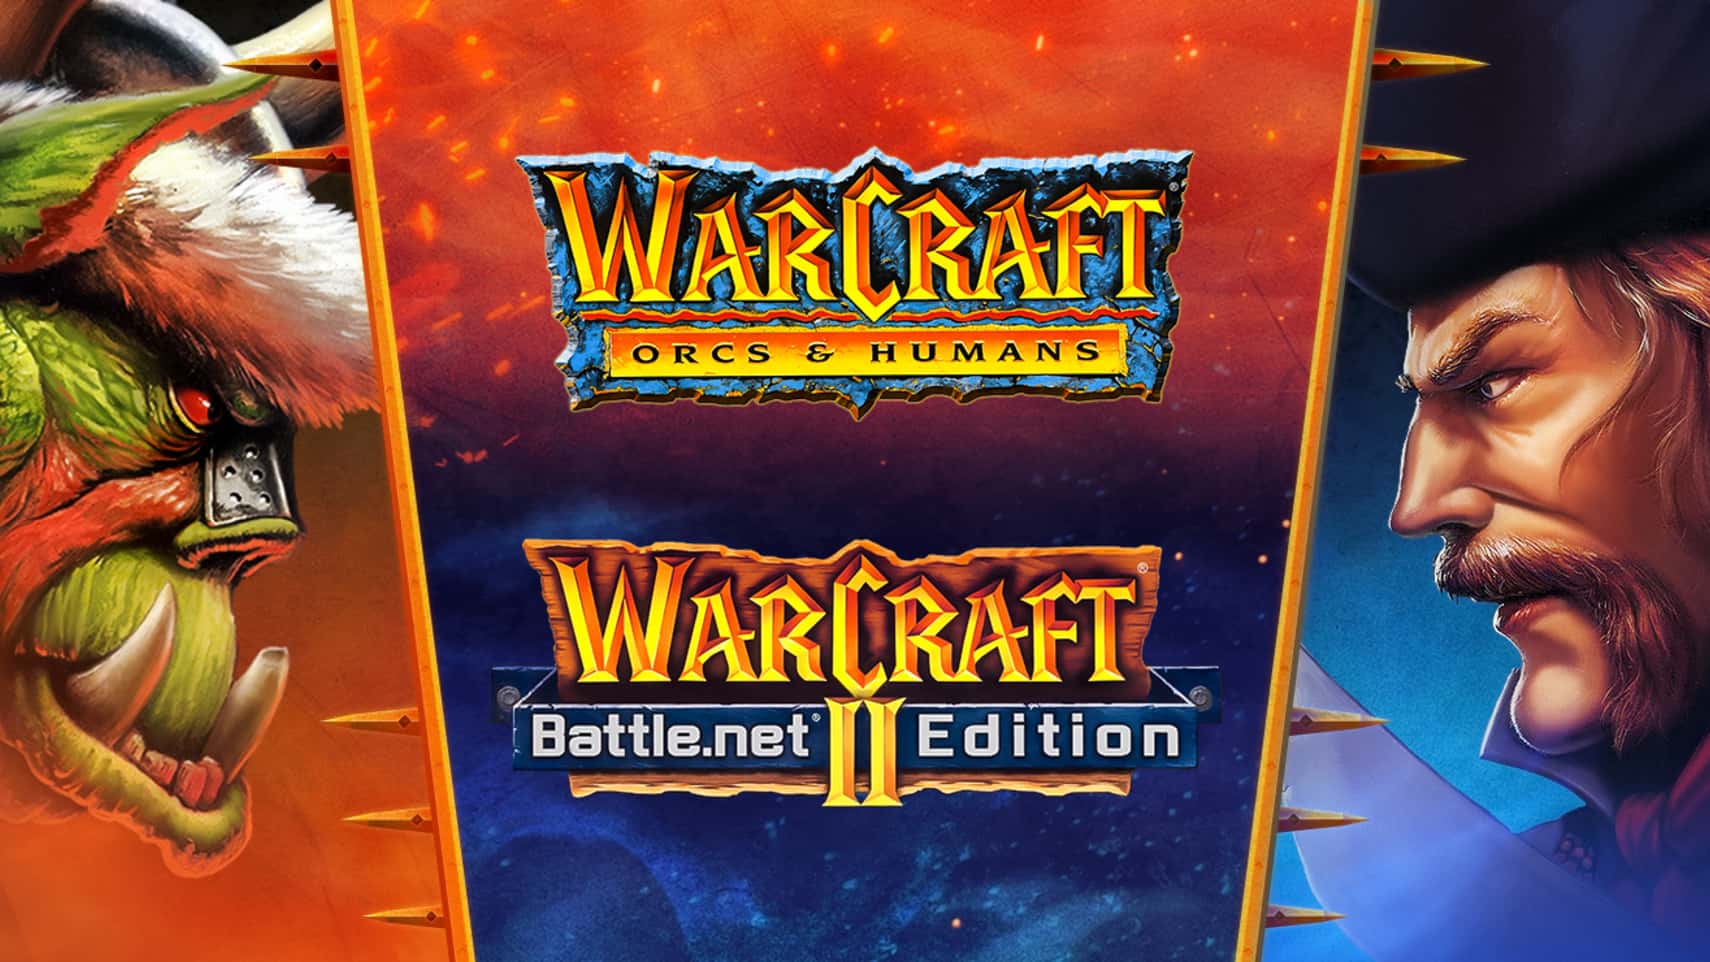 Warcraft: Orcs & Humans and Warcraft II Battle.net Edition launch on GOG